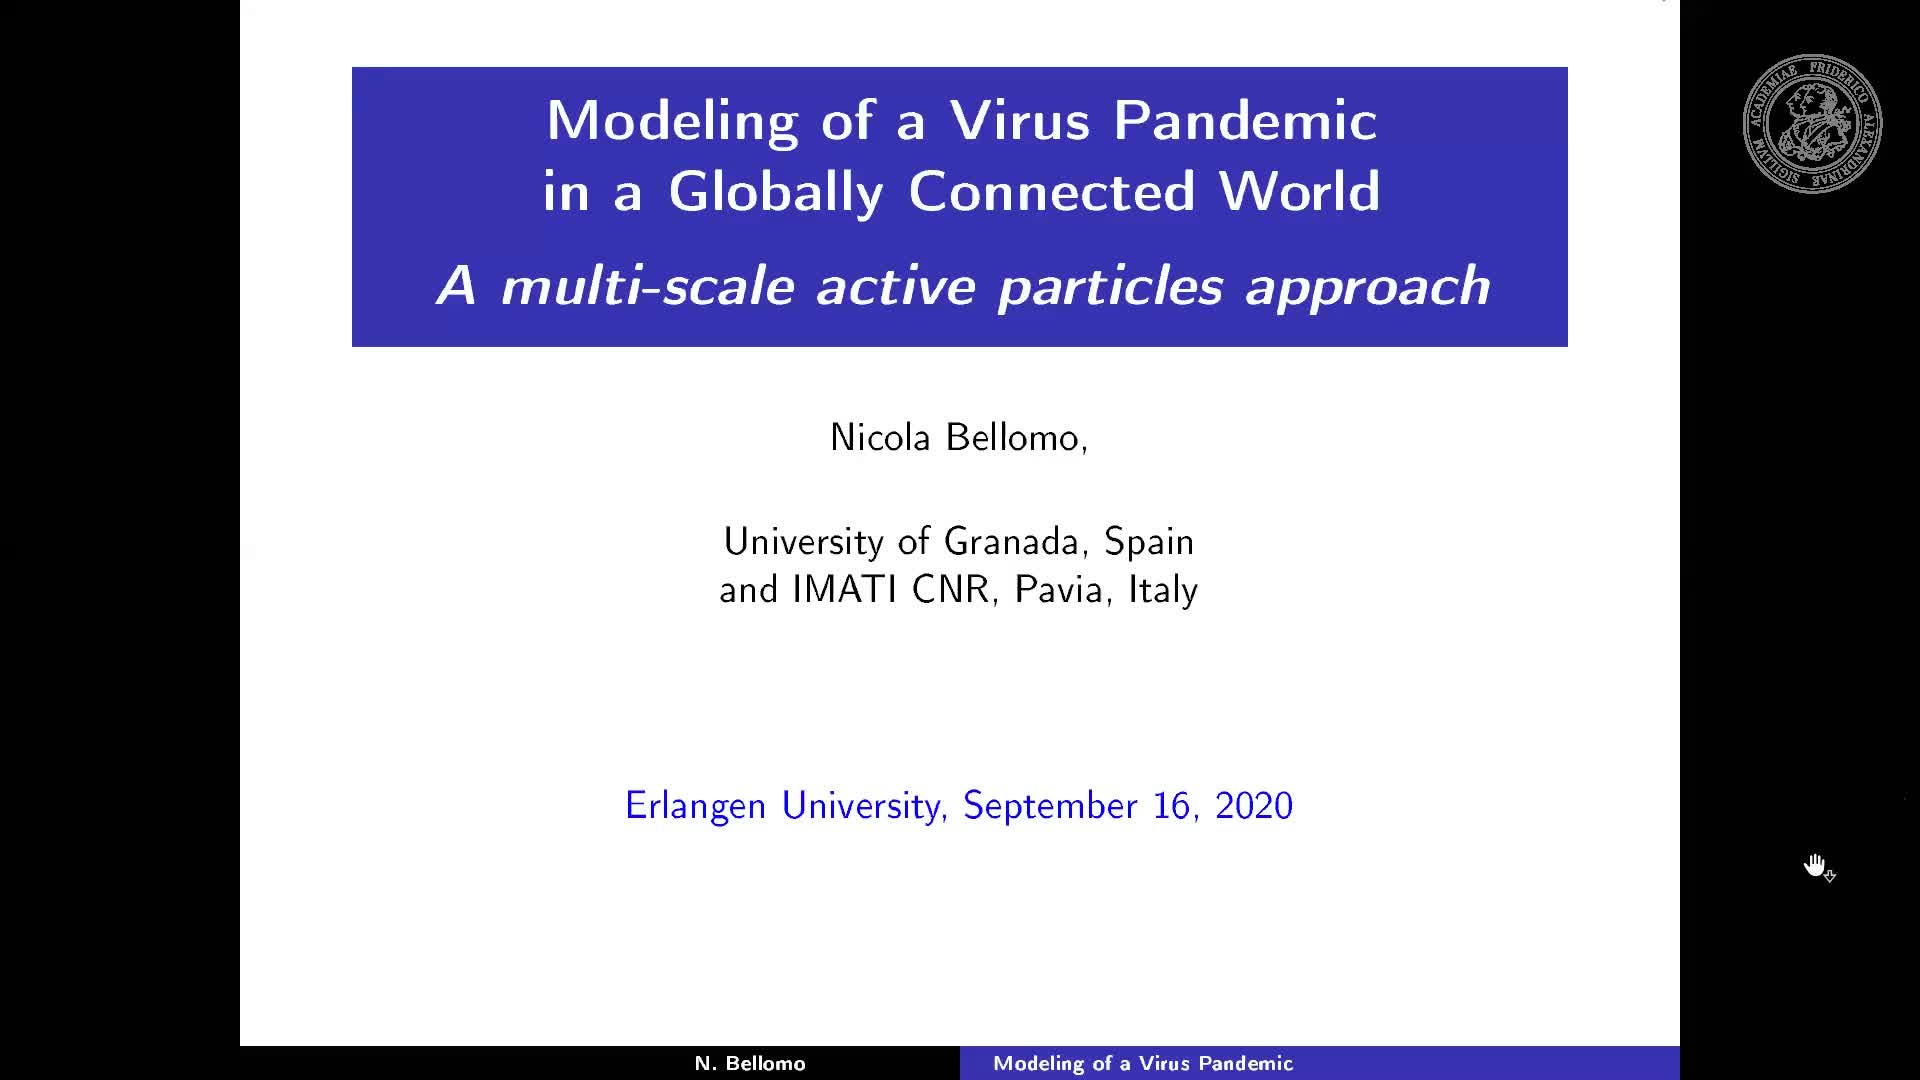 Modeling of a Virus Pandemic in a Globally Connected World: A multi-scale active particles approach (Nicola Bellomo, University of Granada) preview image